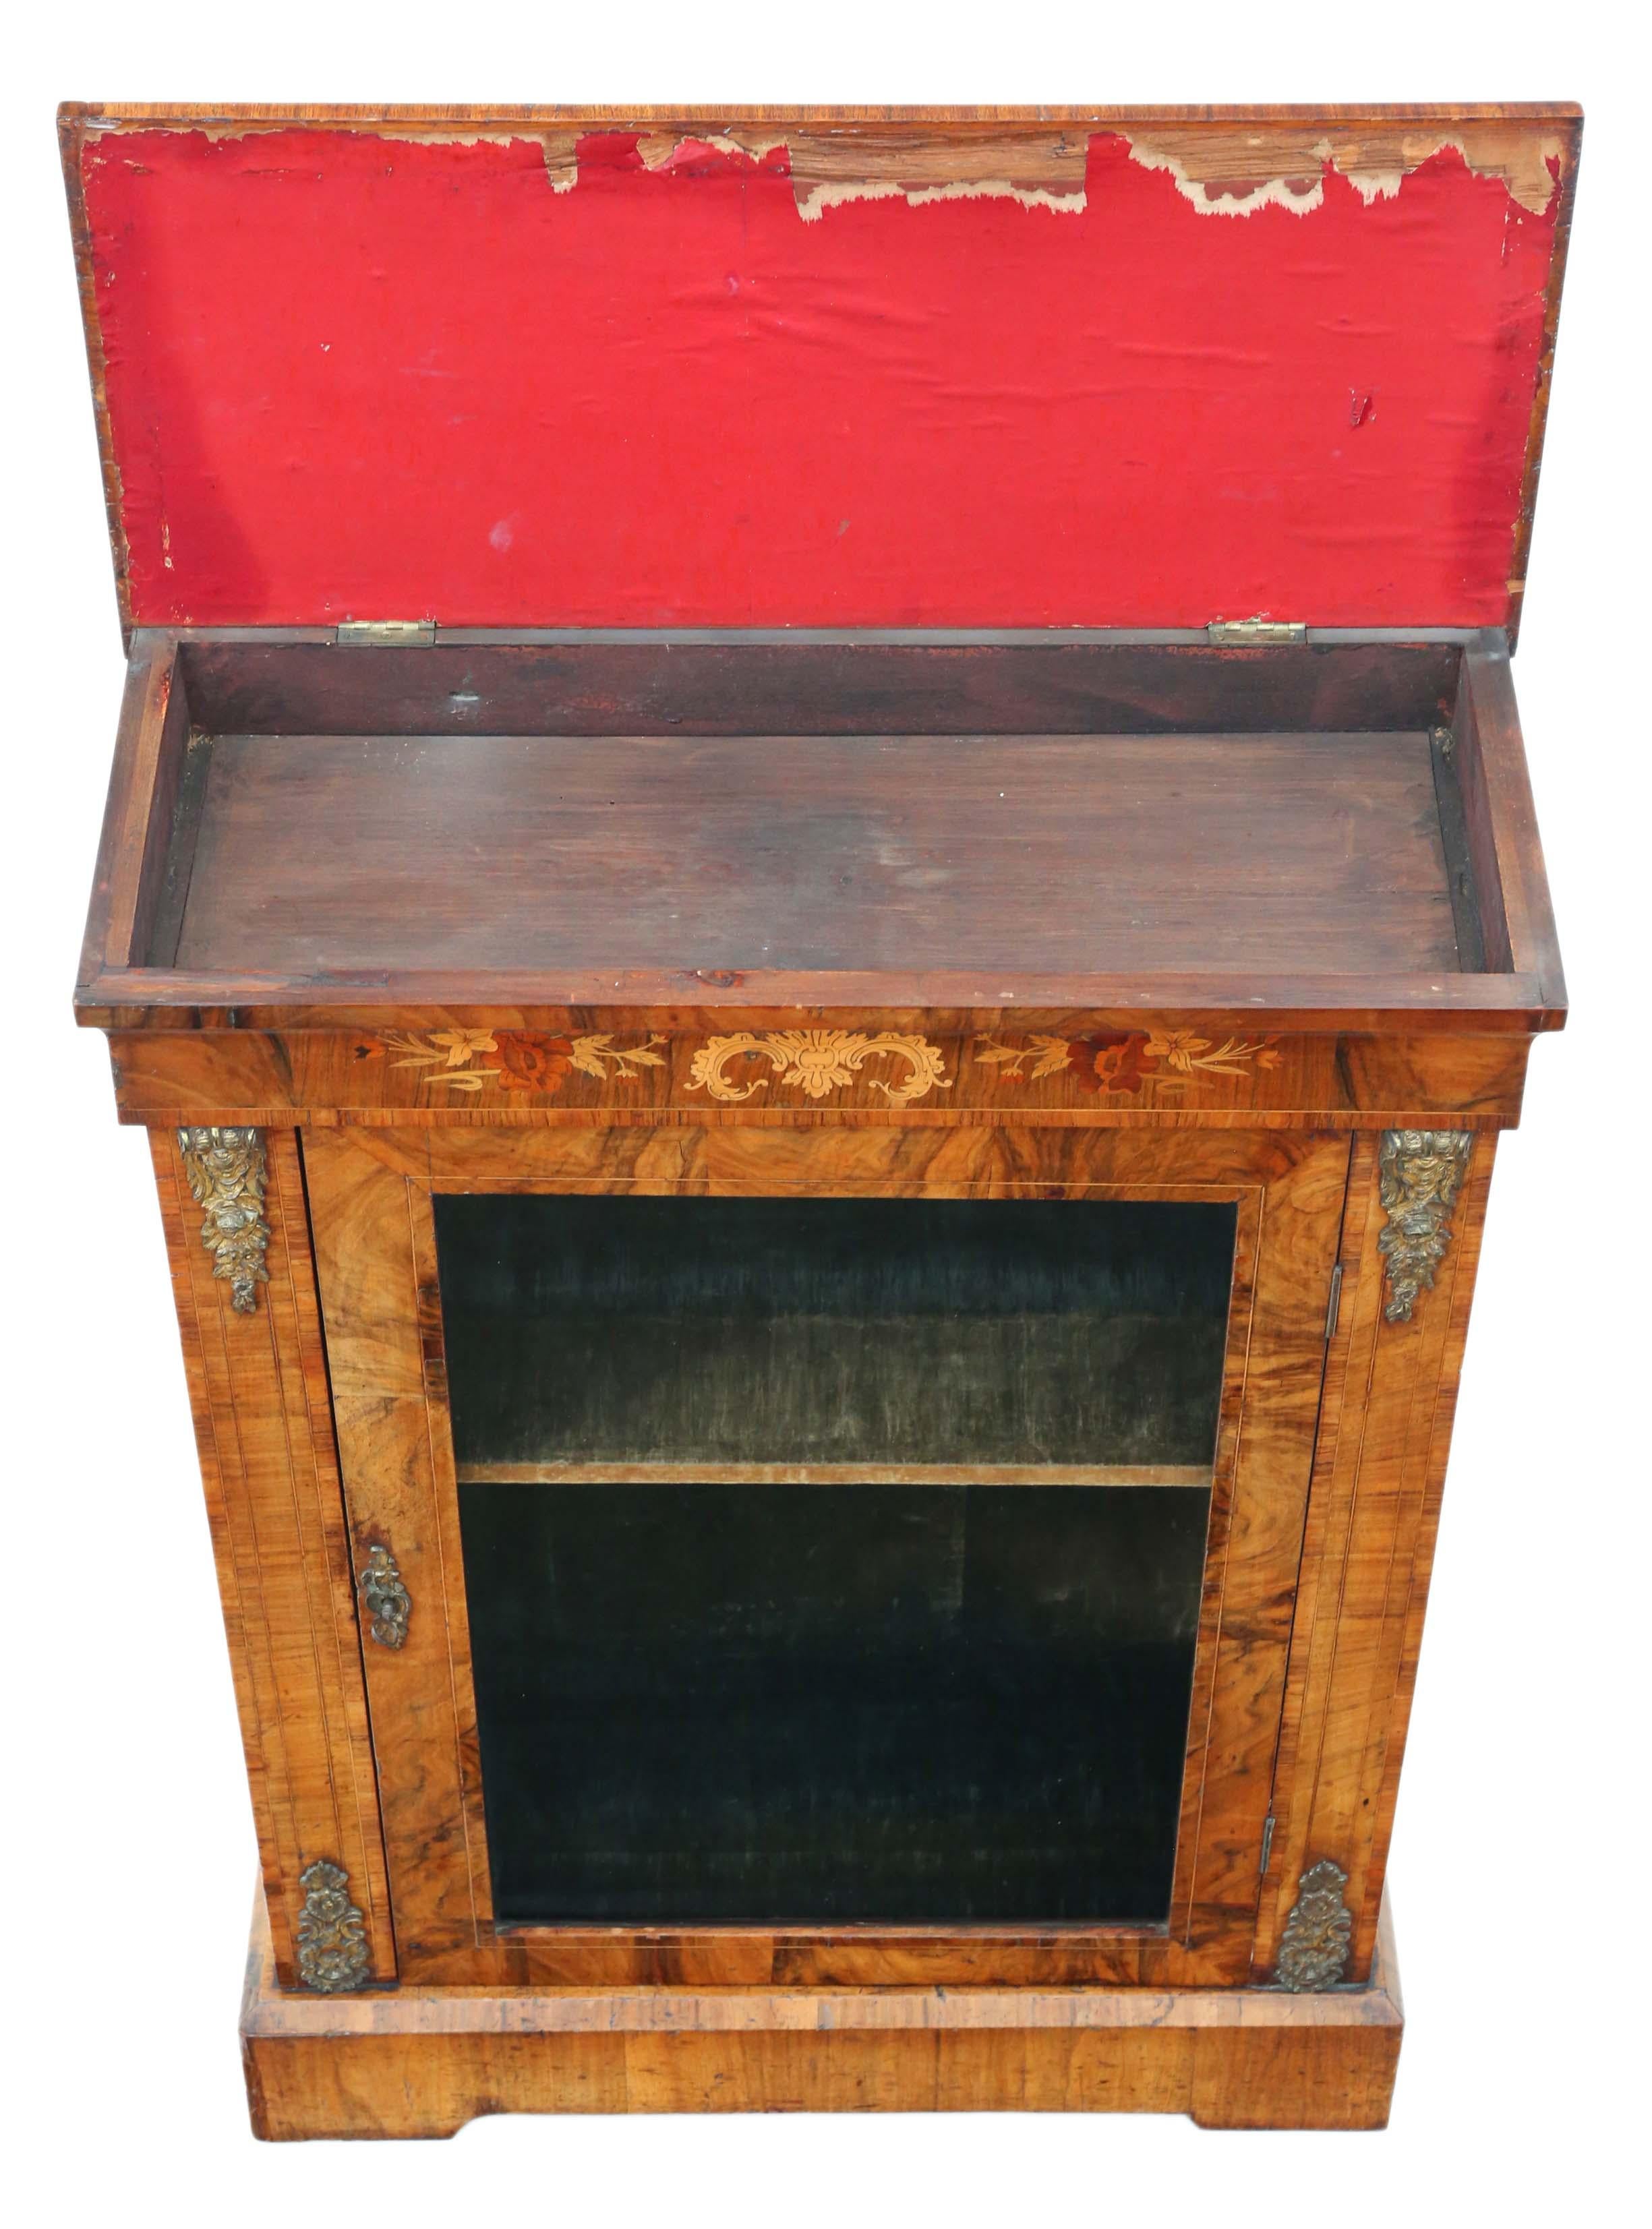 Antique C1880 Quality Inlaid Burr Walnut Pier Display Cabinet C1880 In Good Condition For Sale In Wisbech, Cambridgeshire